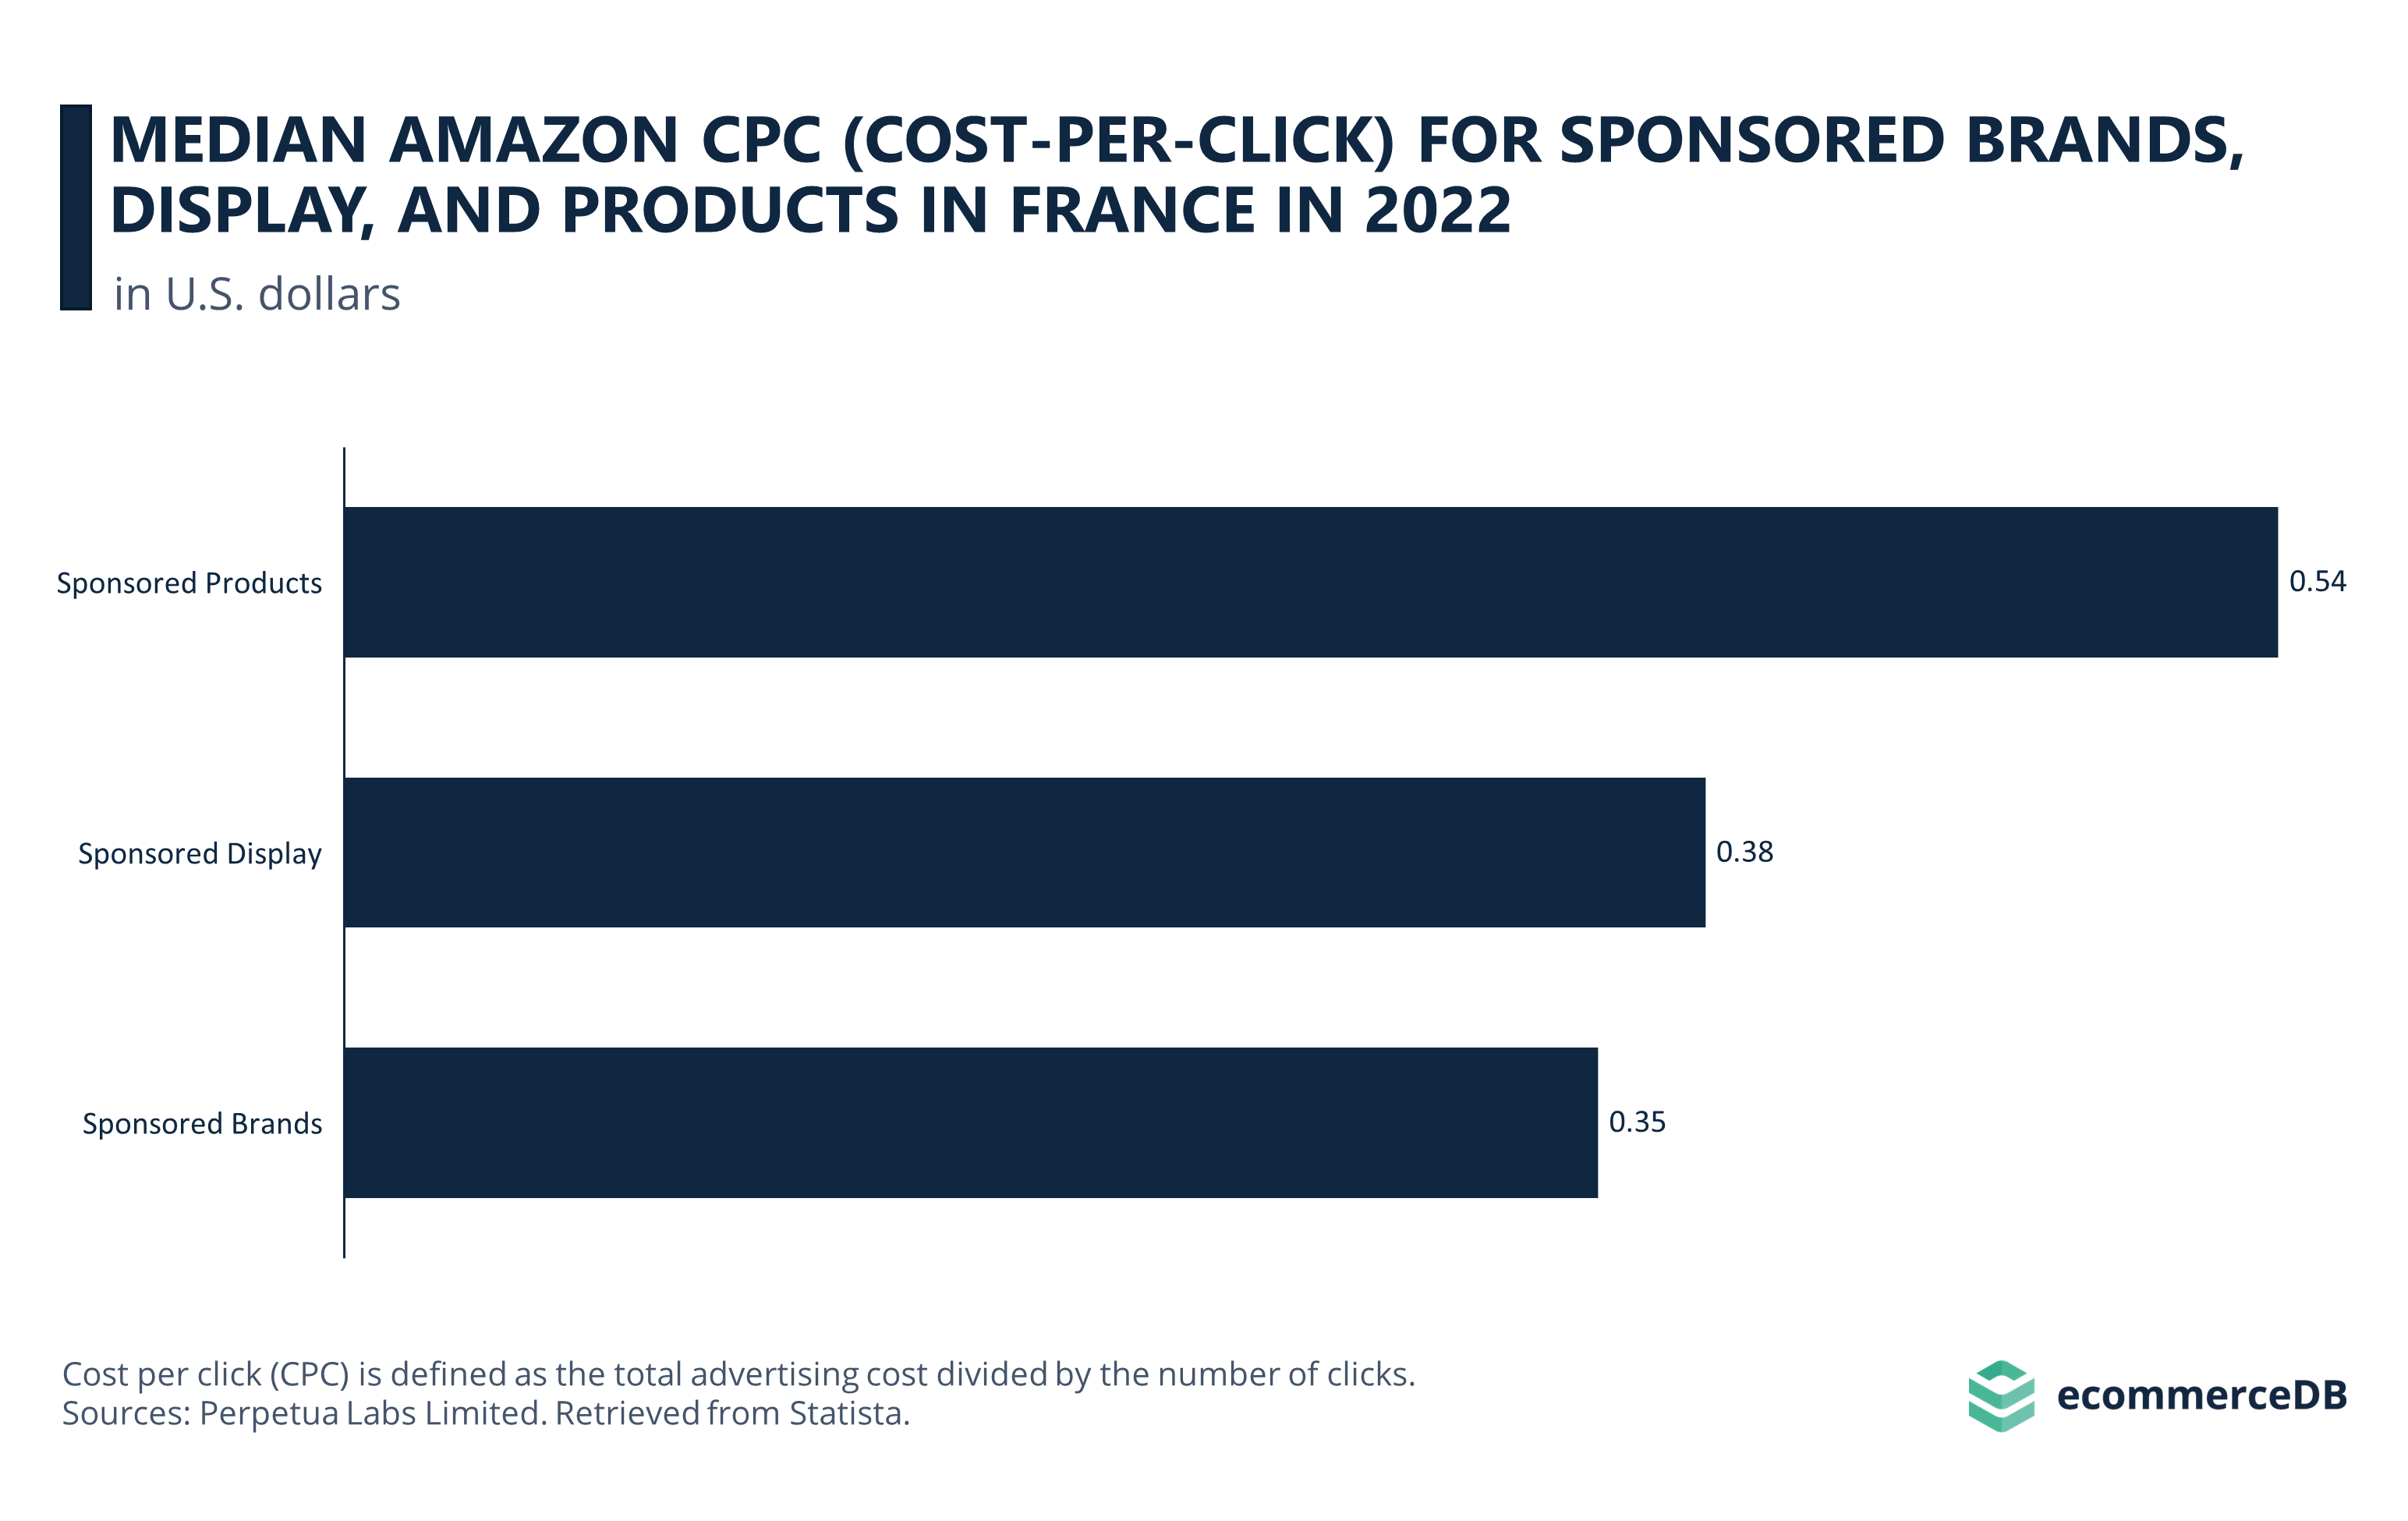 Median Amazon CPC for 3 Ad Types in France